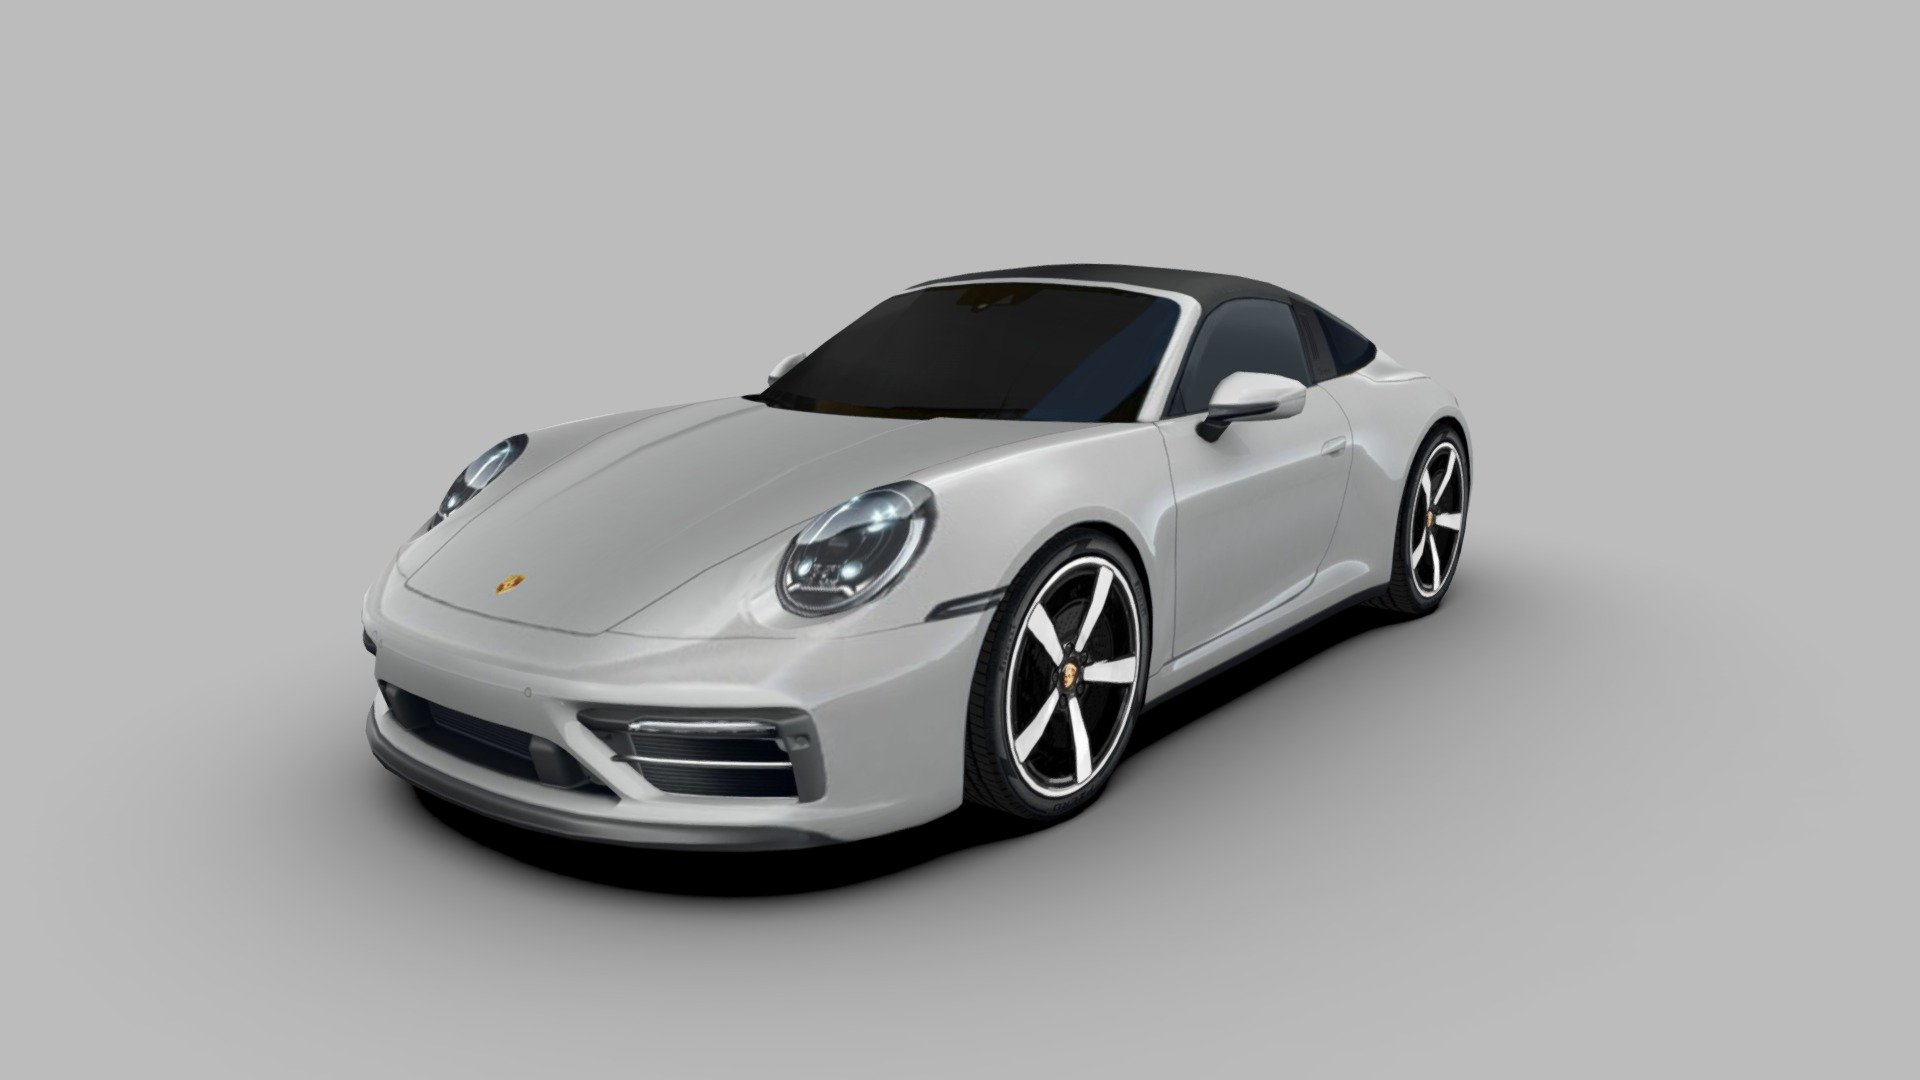 3d model of the Porsche 911 Targa 4 GTS, 992 model, a two-door high performance rear-engined sports car.

The model is very low-poly, full-scale, real photos texture (single 2048 x 2048 png).

Package includes 5 file formats and texture (3ds, fbx, dae, obj and skp)

Hope you enjoy it.

José Bronze - Porsche 911 Targa 4 GTS 992 - Buy Royalty Free 3D model by Jose Bronze (@pinceladas3d) 3d model